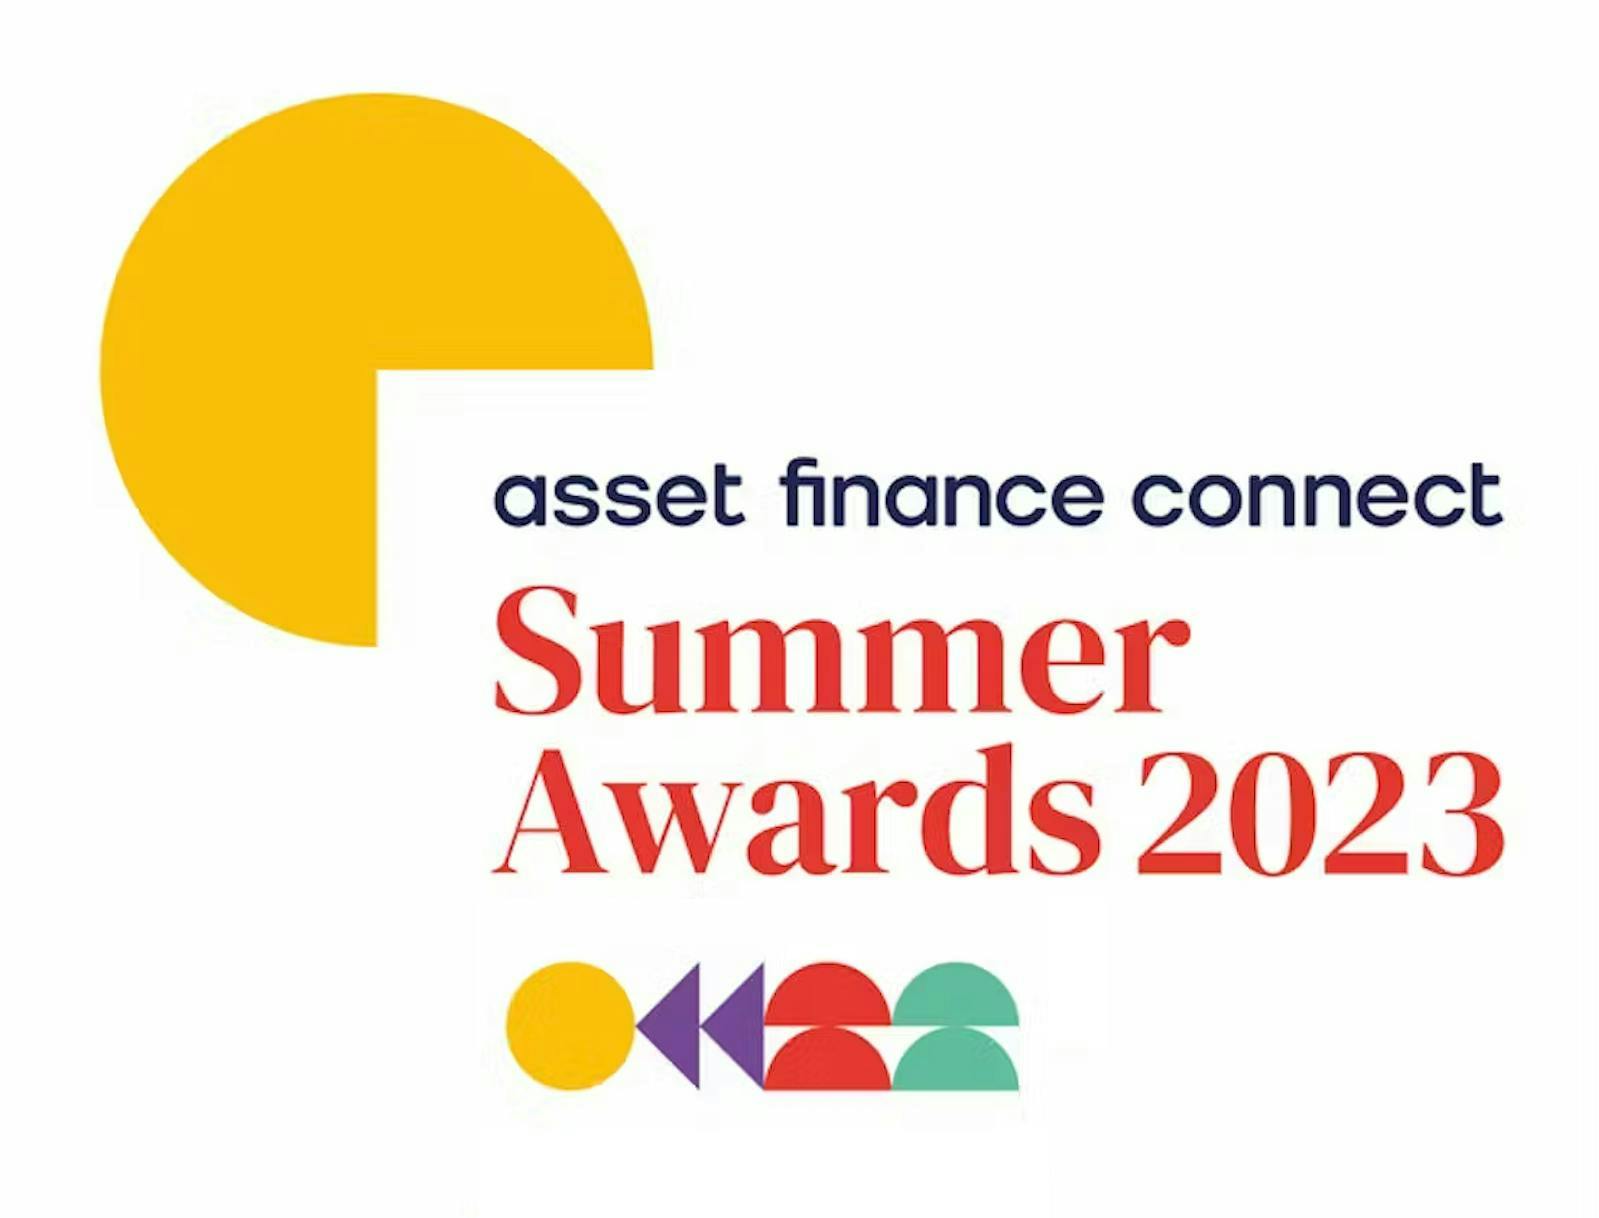 graphic for the Asset Finance Connect Summer Awards, 2023